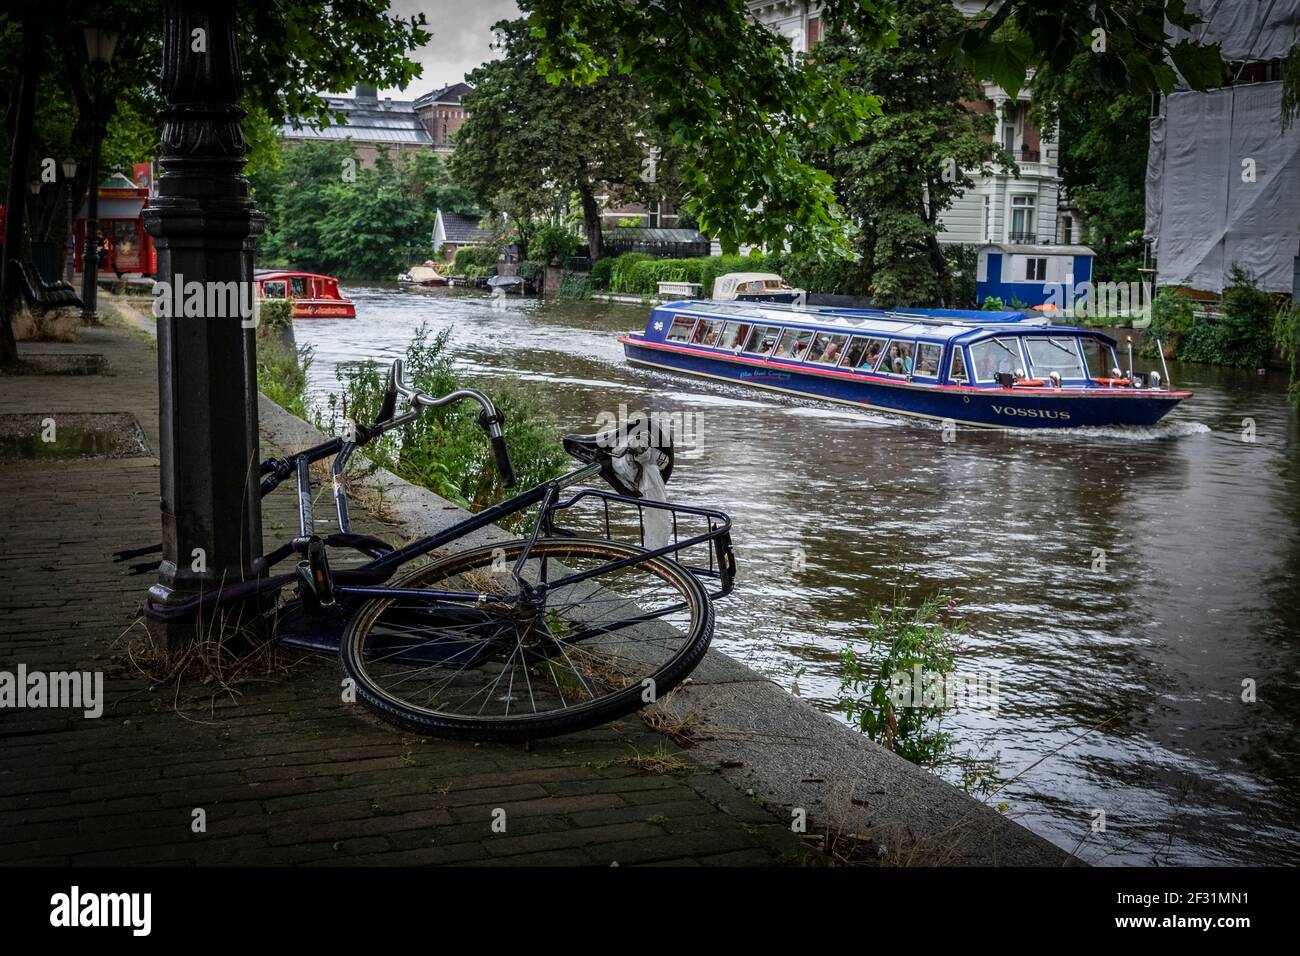 Bicycle wreck near Amsterdam canal Stock Photo